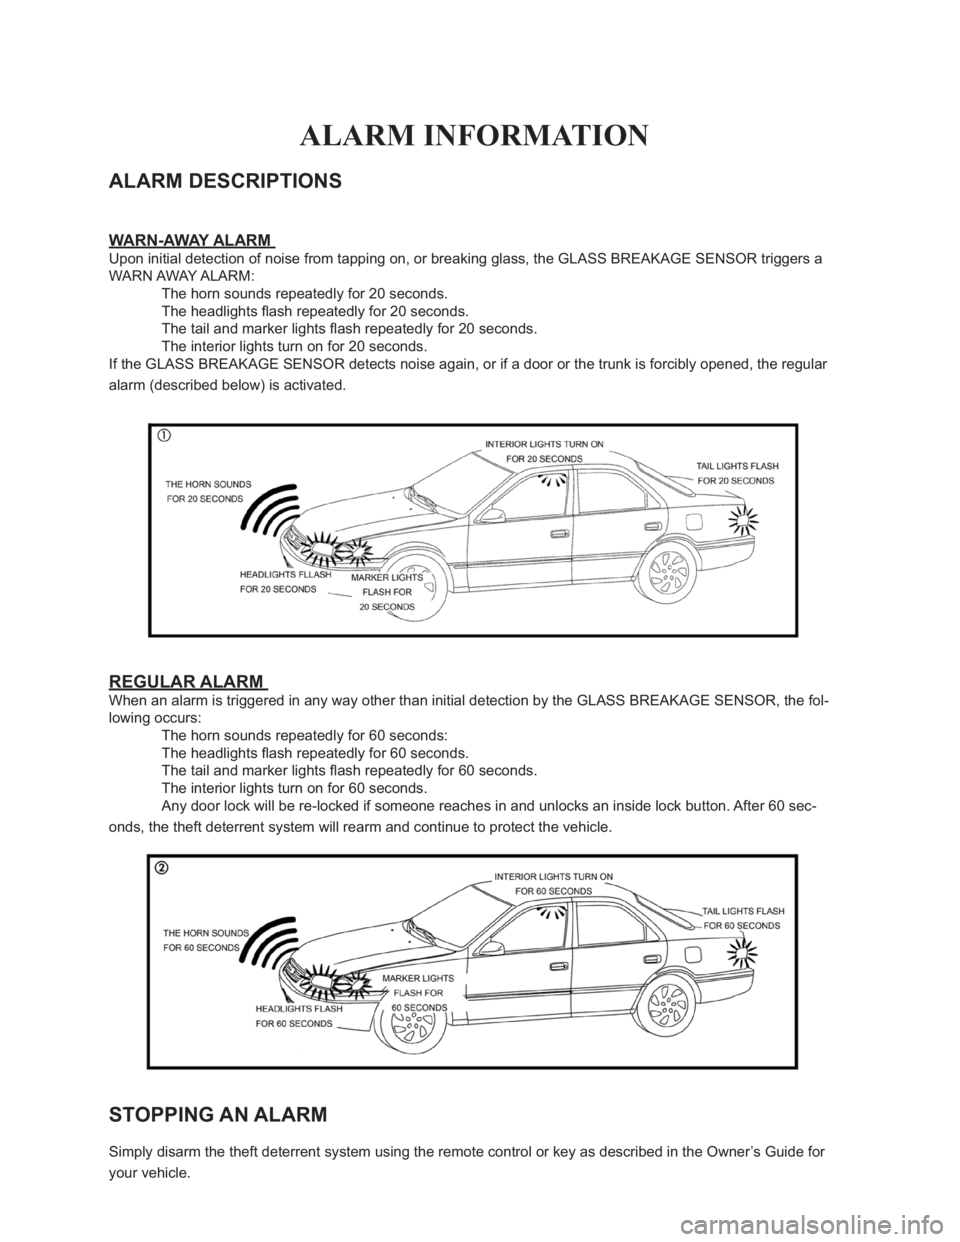 TOYOTA SOLARA 2004  Accessories, Audio & Navigation (in English) 
ALARM INFORMATION
ALARM DESCRIPTIONS 
WARN-AWAY ALARM 
Upon initial detection of noise from tapping on, or breaking glass, the GLASS BREAKAGE SENSOR triggers a 
WARN AWAY ALARM: 
� �7�K�H��K�R�U�Q�